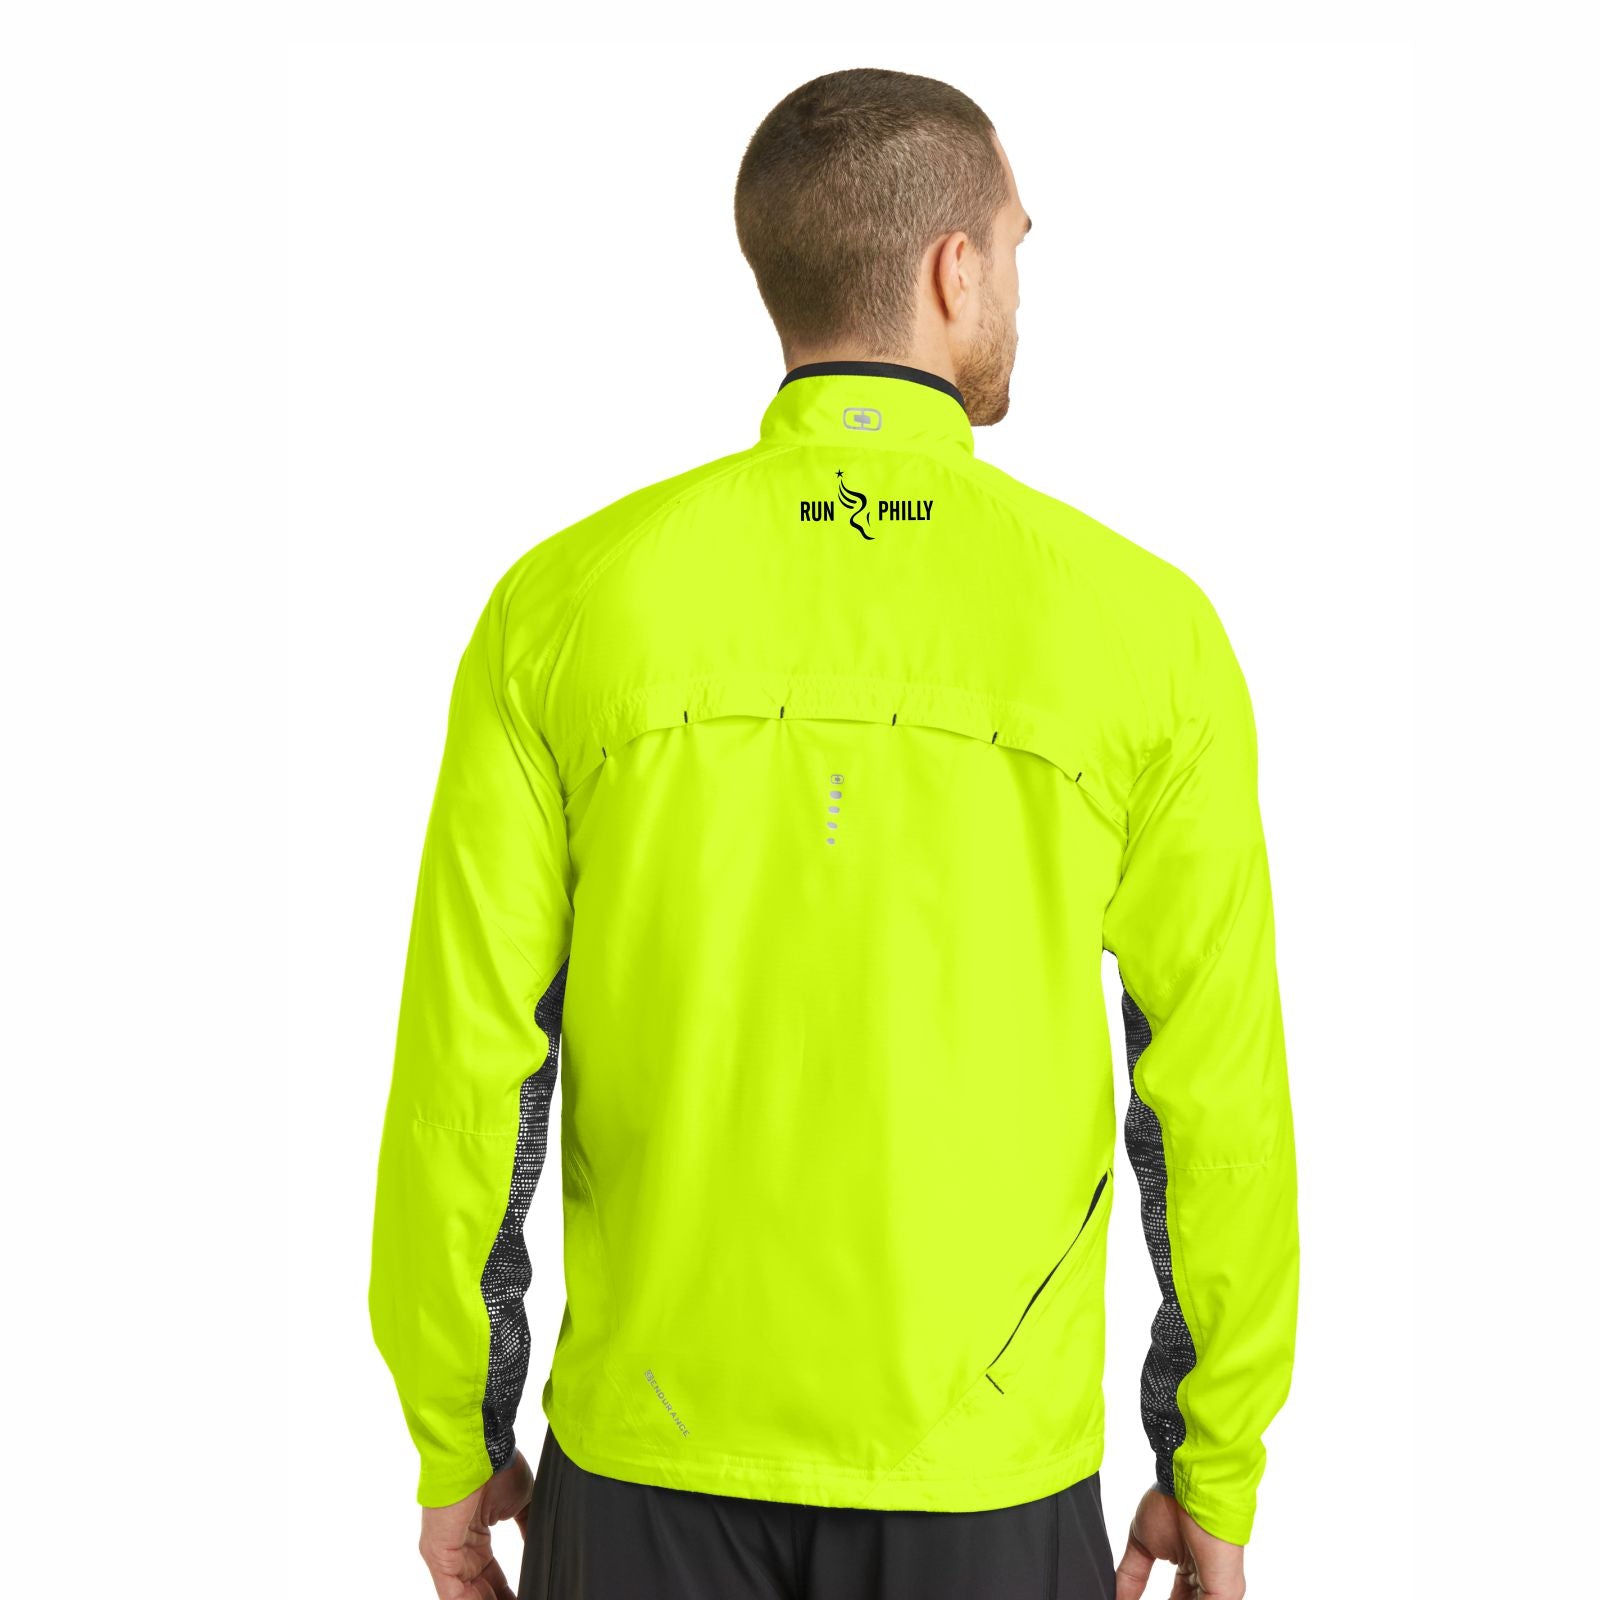 Men's Reflective Zip DWR Shell -Pace Yellow- AACR 26.2 Embroidery